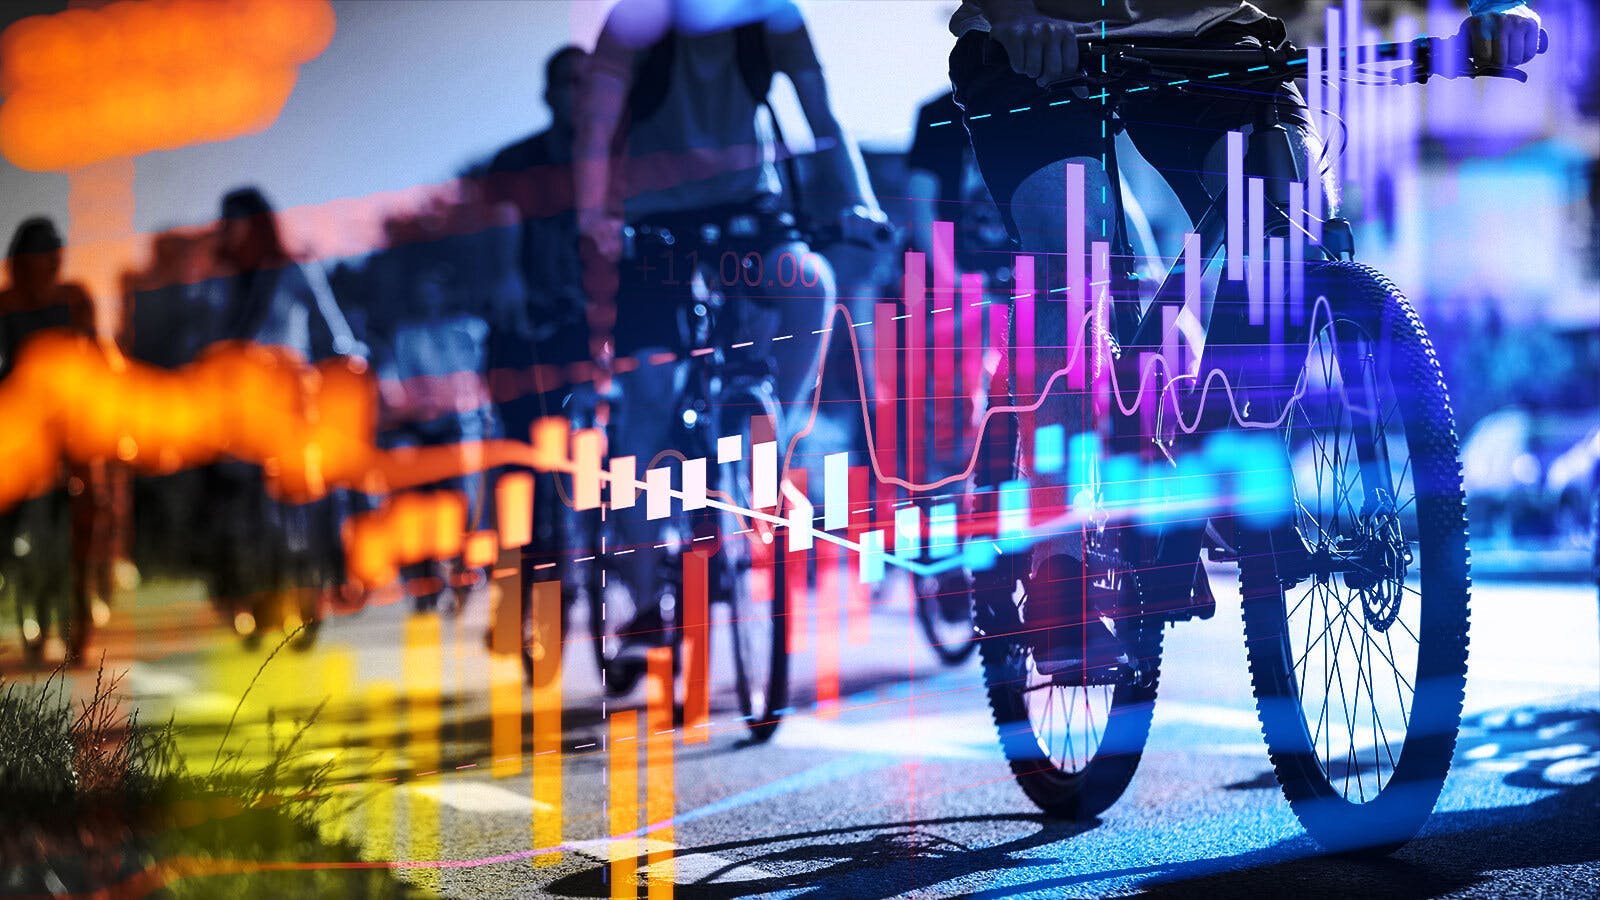 Abstract graphic with graphs, bikers and a rainbow overlay